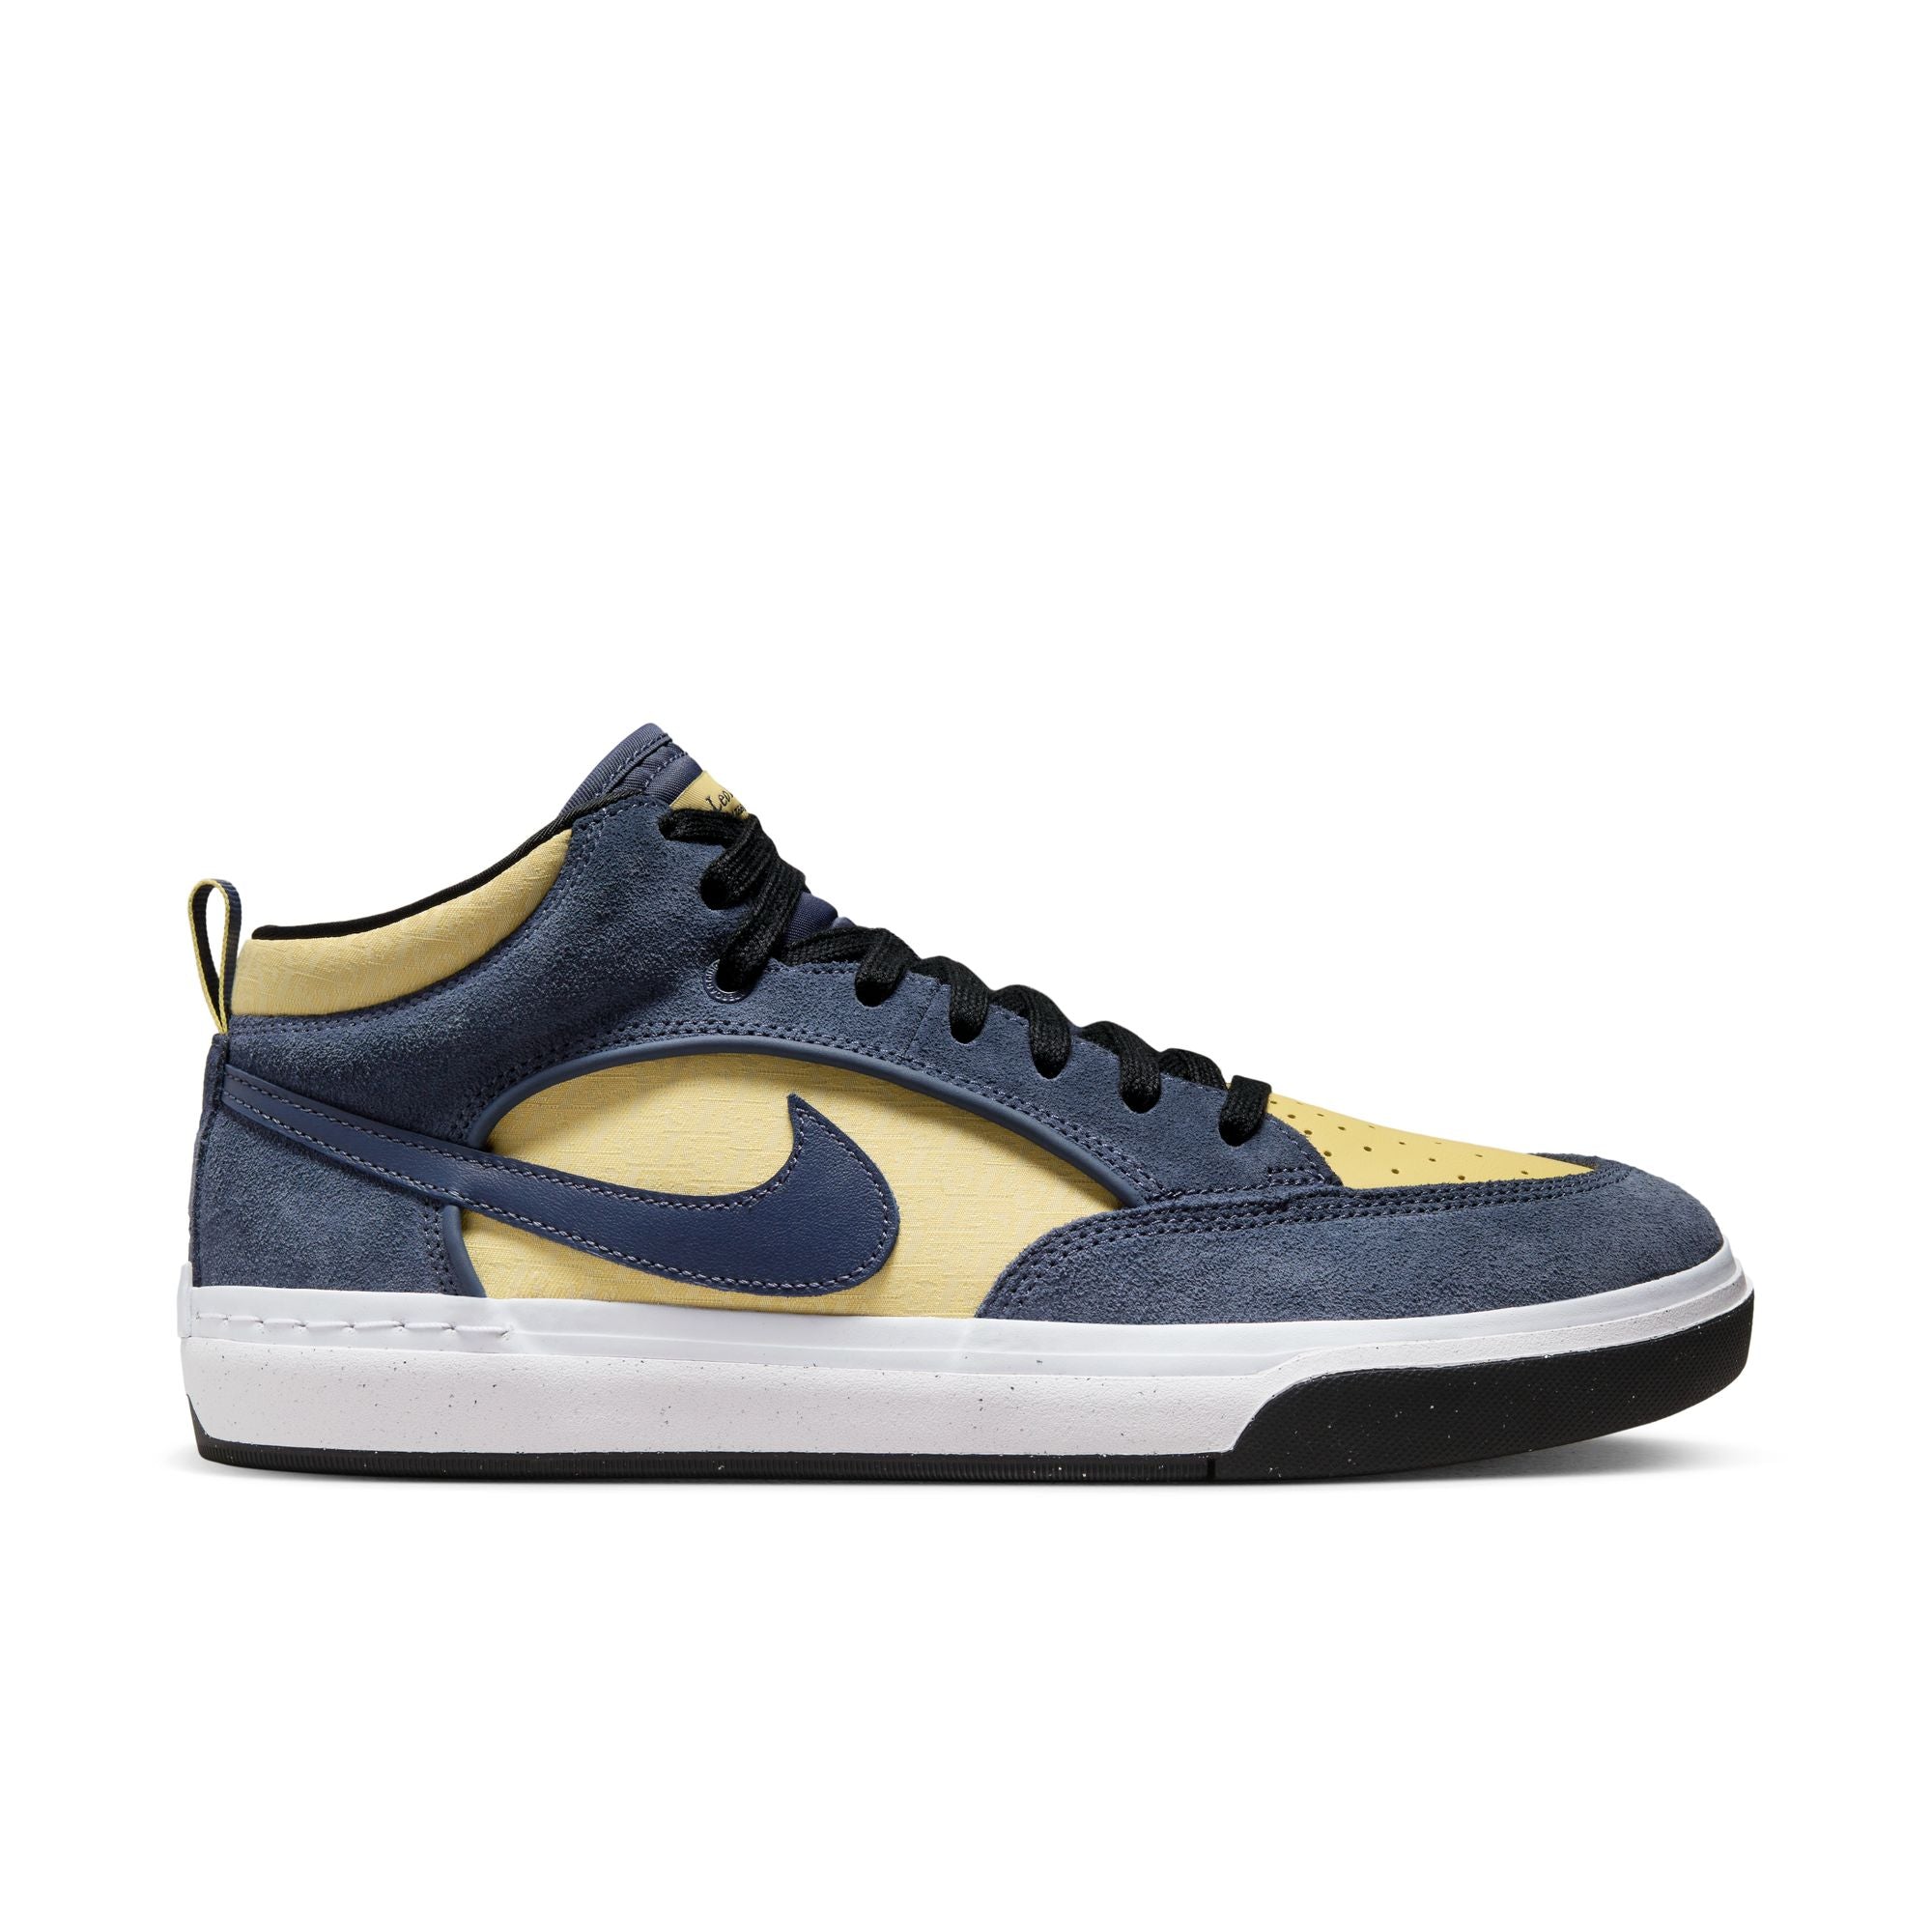 Mid top Nike SB Leo Baker skate shoes, in yellow and blue colourway, with white and black sole.